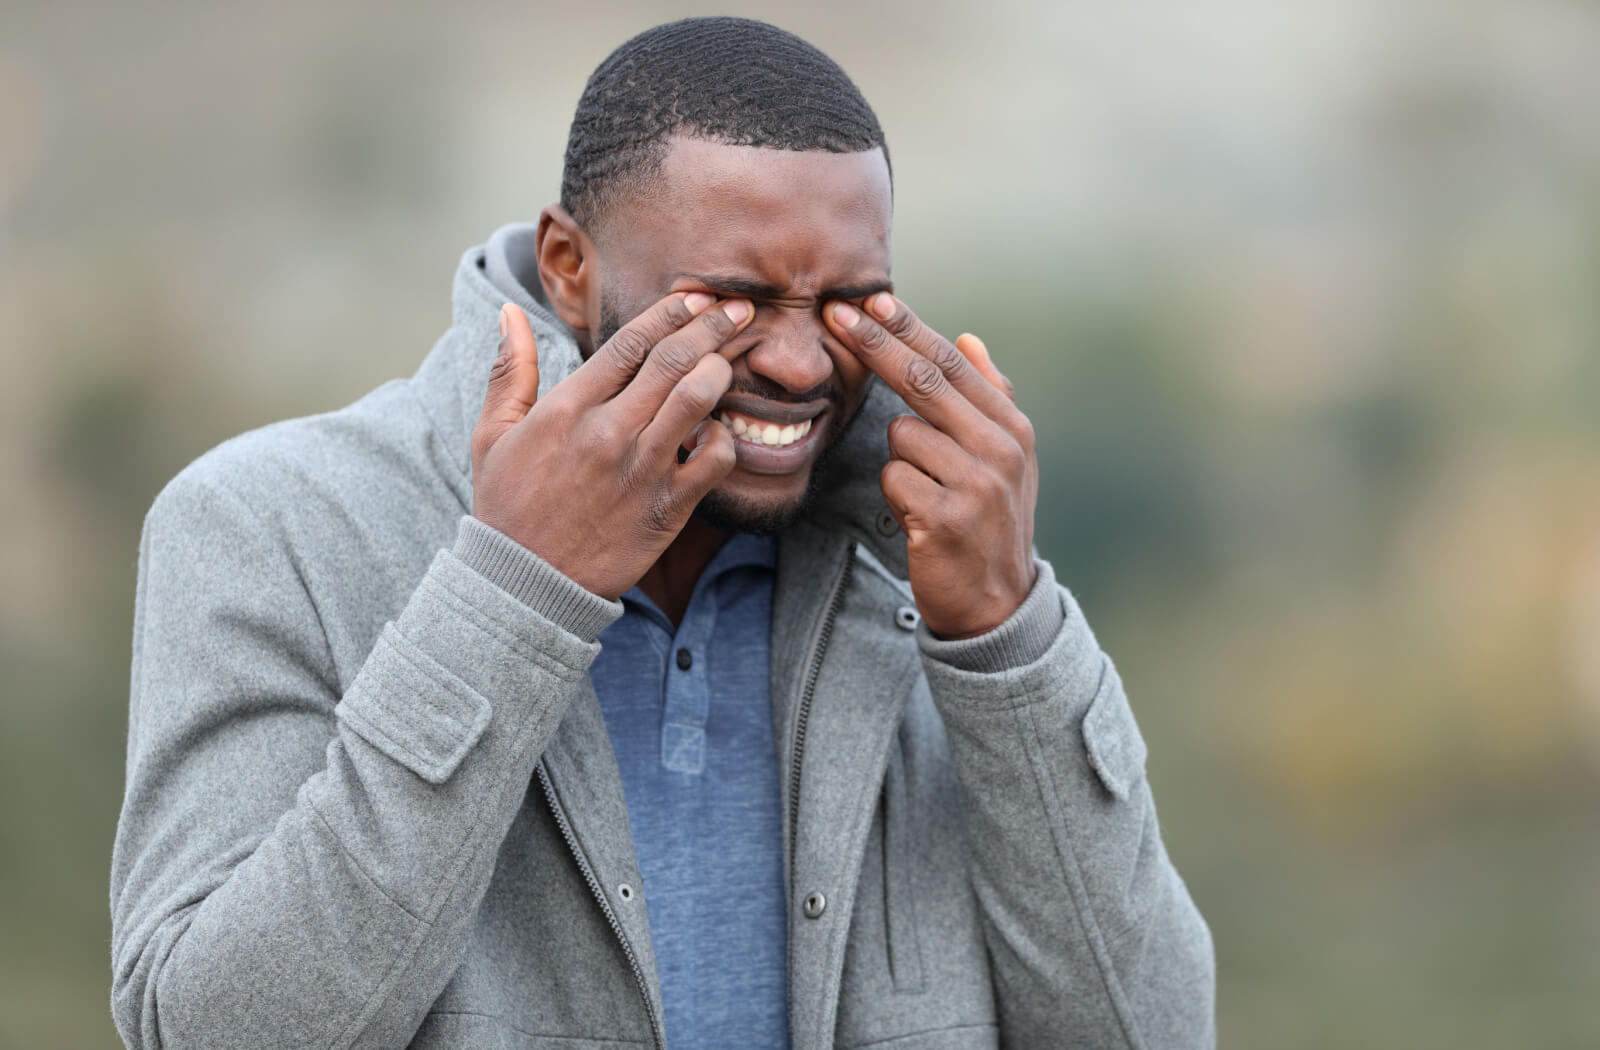 A man in his jacket rubbing his eyes with both hands.